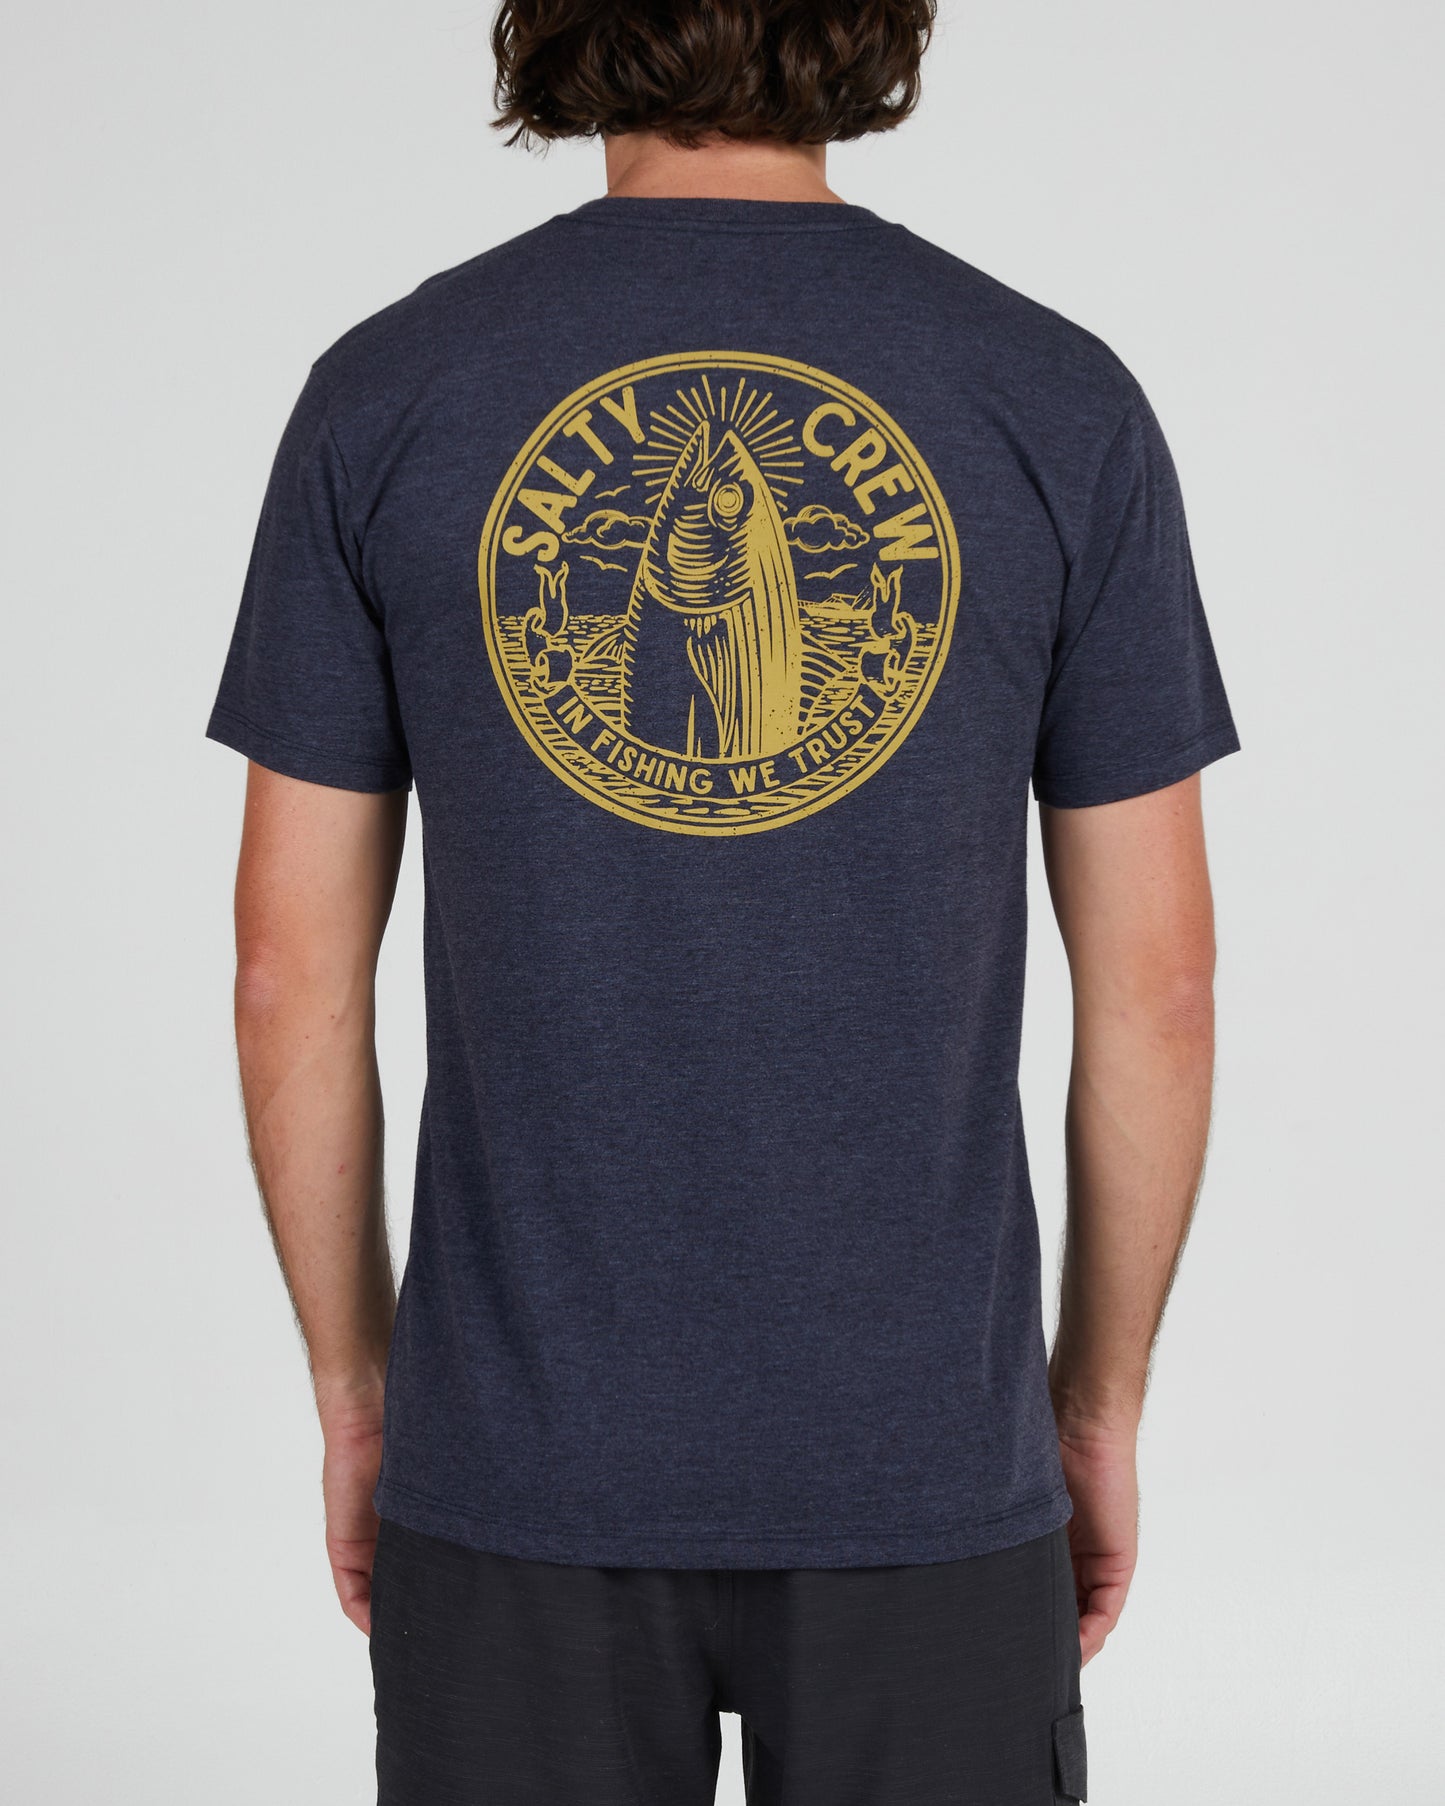 On body back of the In Fishing We Trust Navy Heather S/S Premium Tee